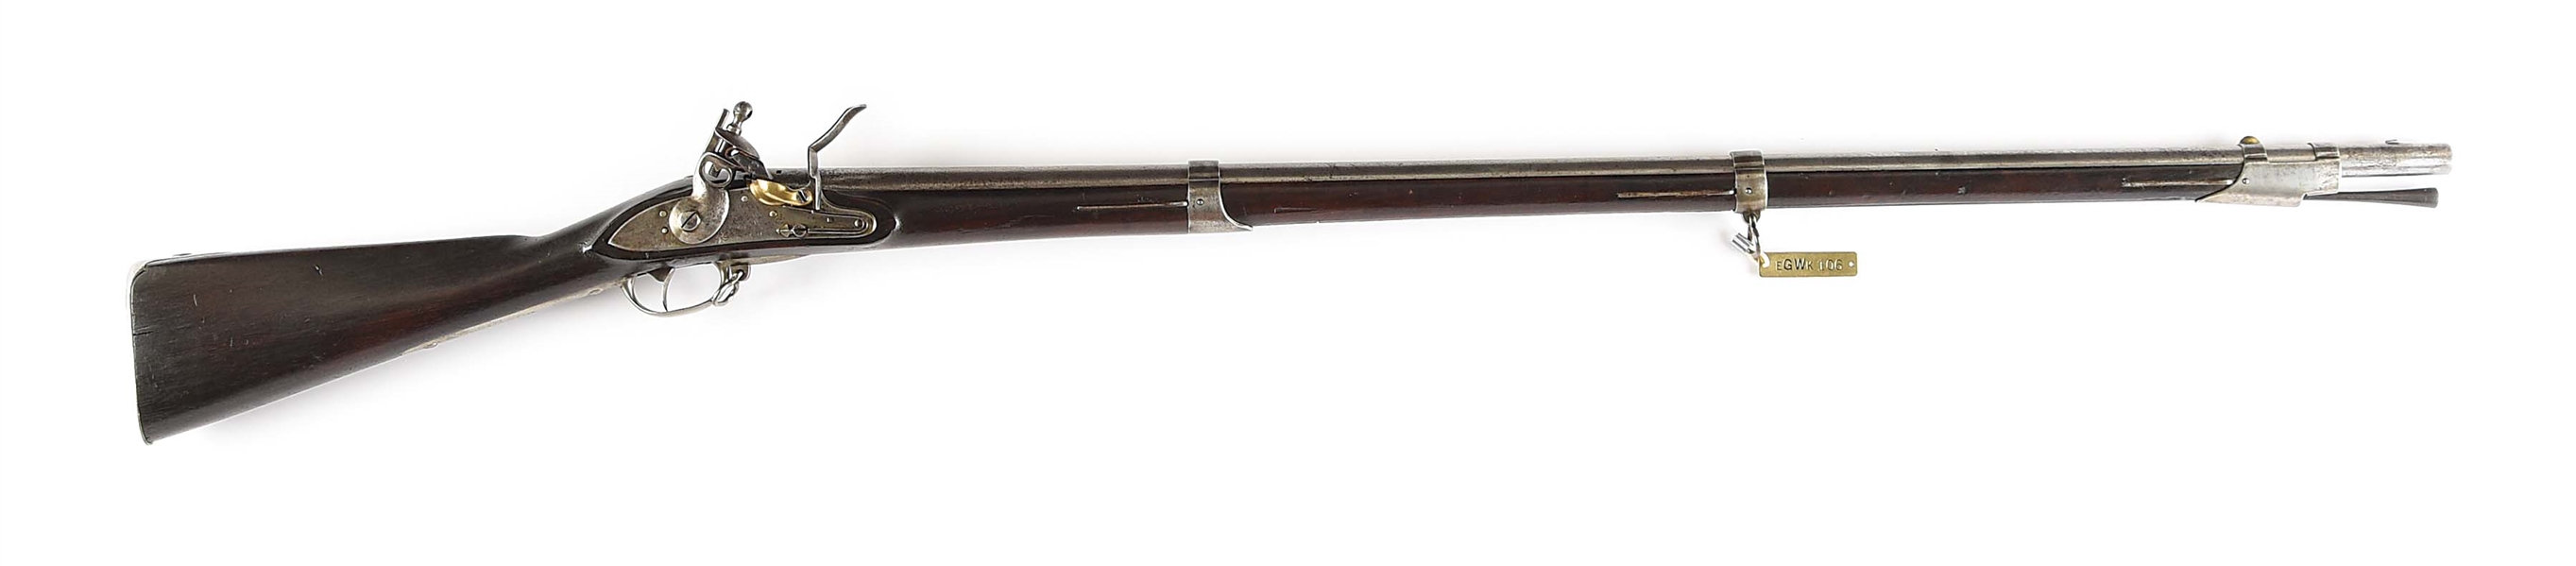 (A) WHITNEY MODEL 1812 STATE OF NEW YORK CONTRACT FLINTLOCK MUSKET.